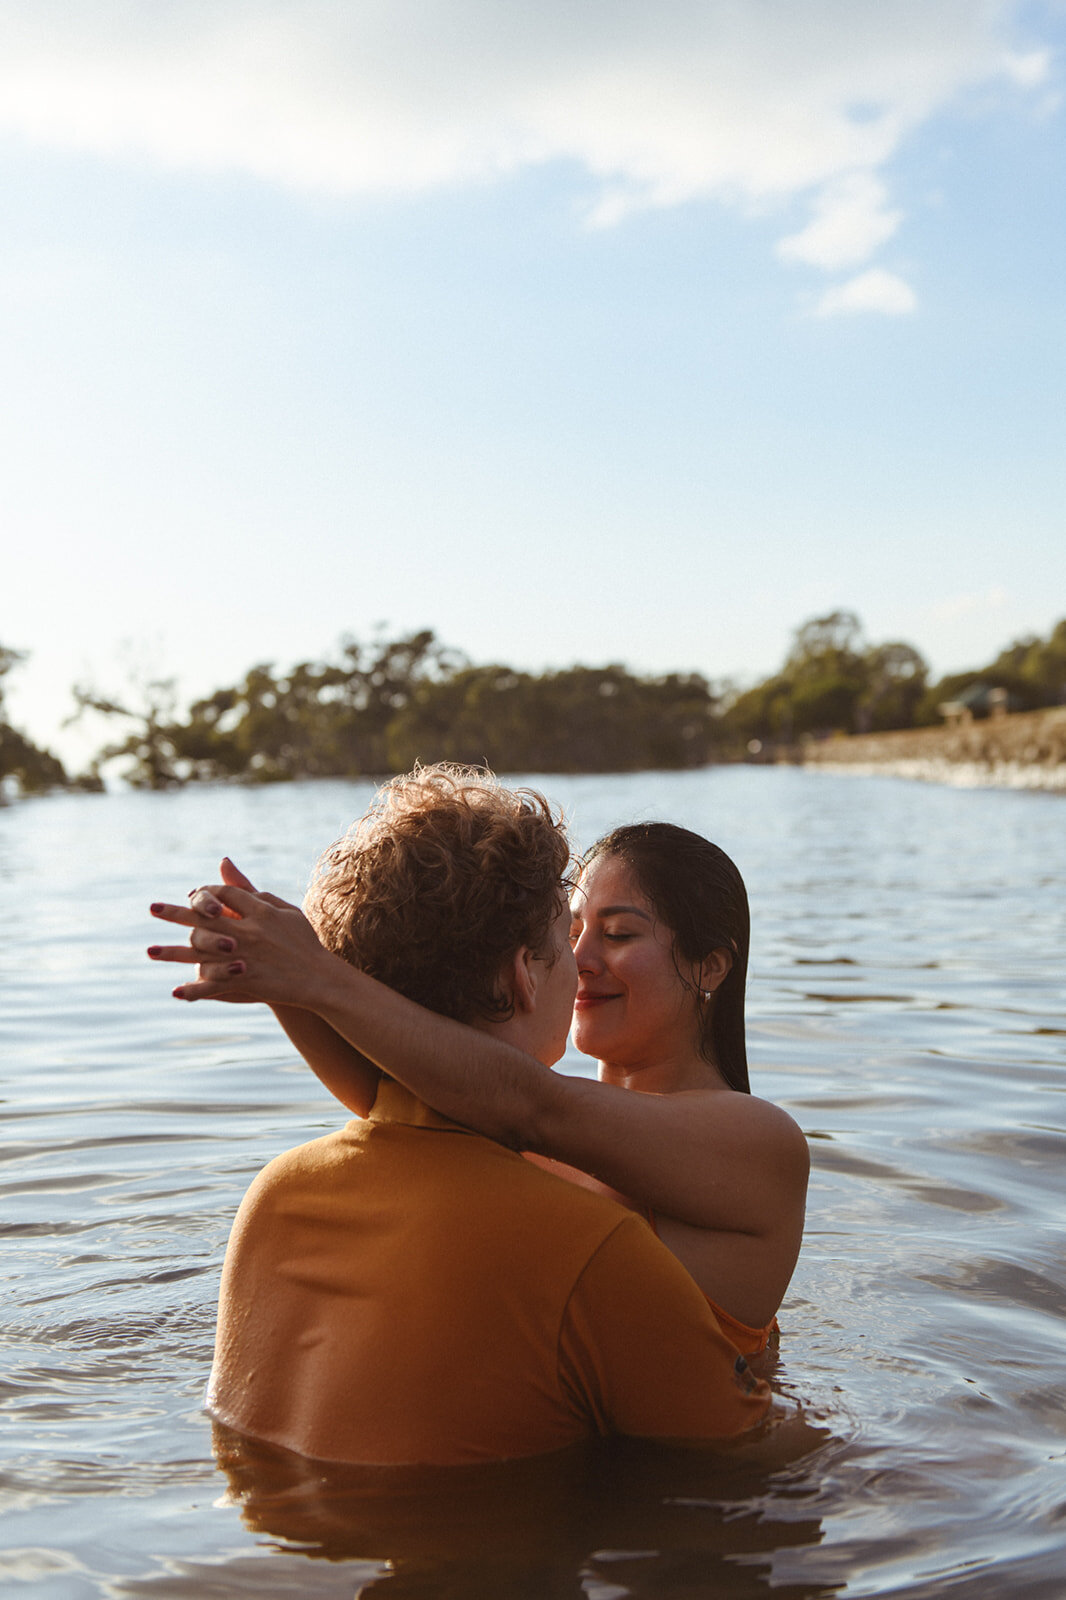 couples photoshoot in water. Engagement photoshoot in lake